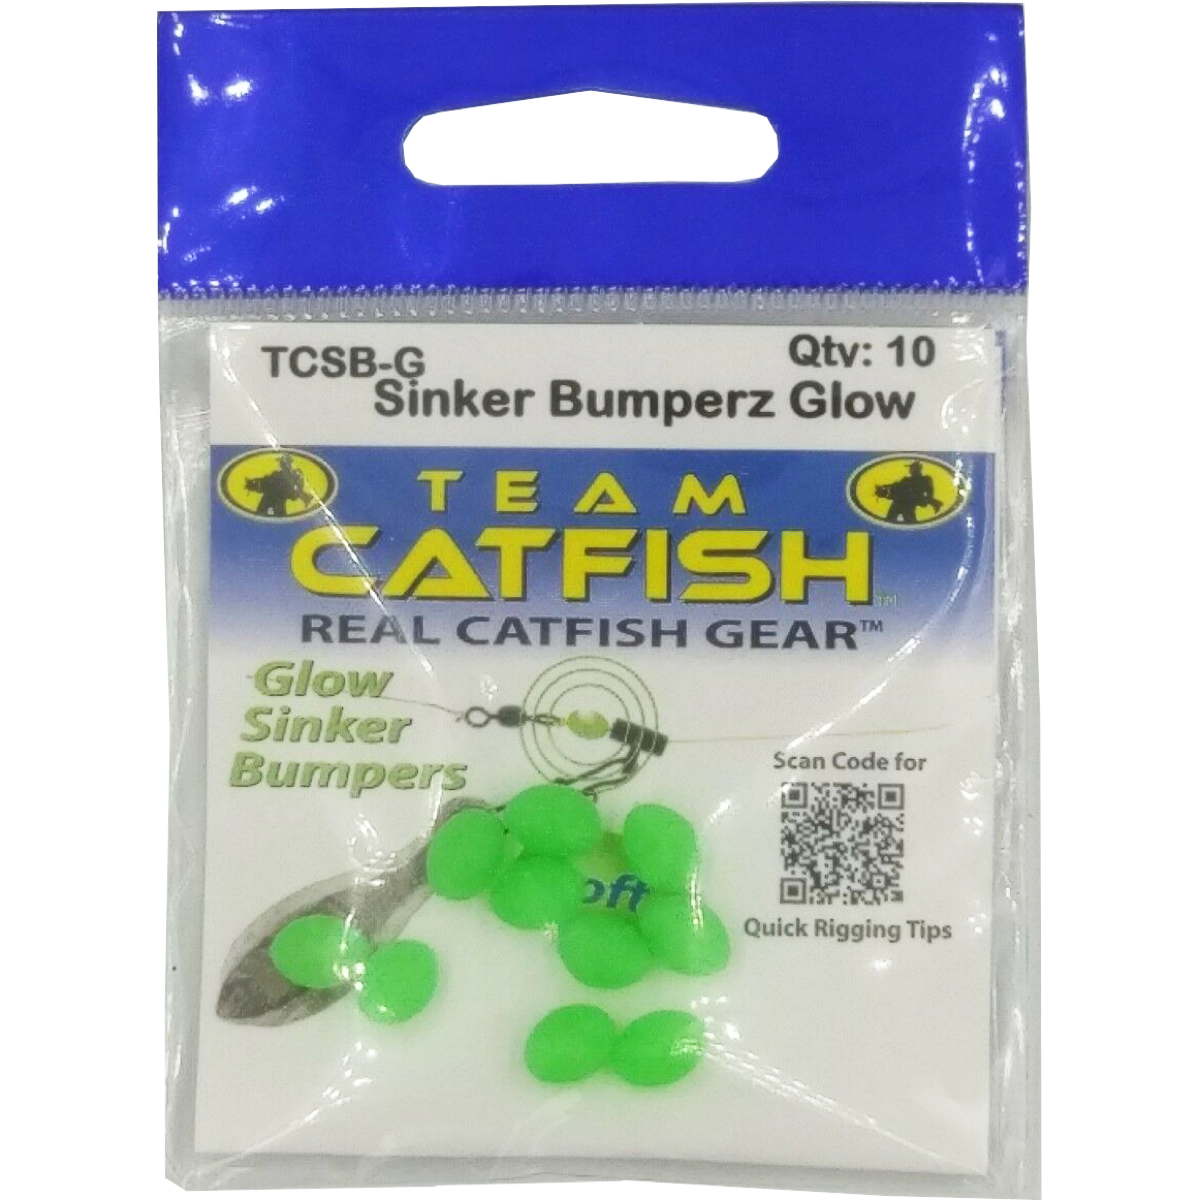 Photo of Boss Kat Glow Sinker Bumperz for sale at United Tackle Shops.